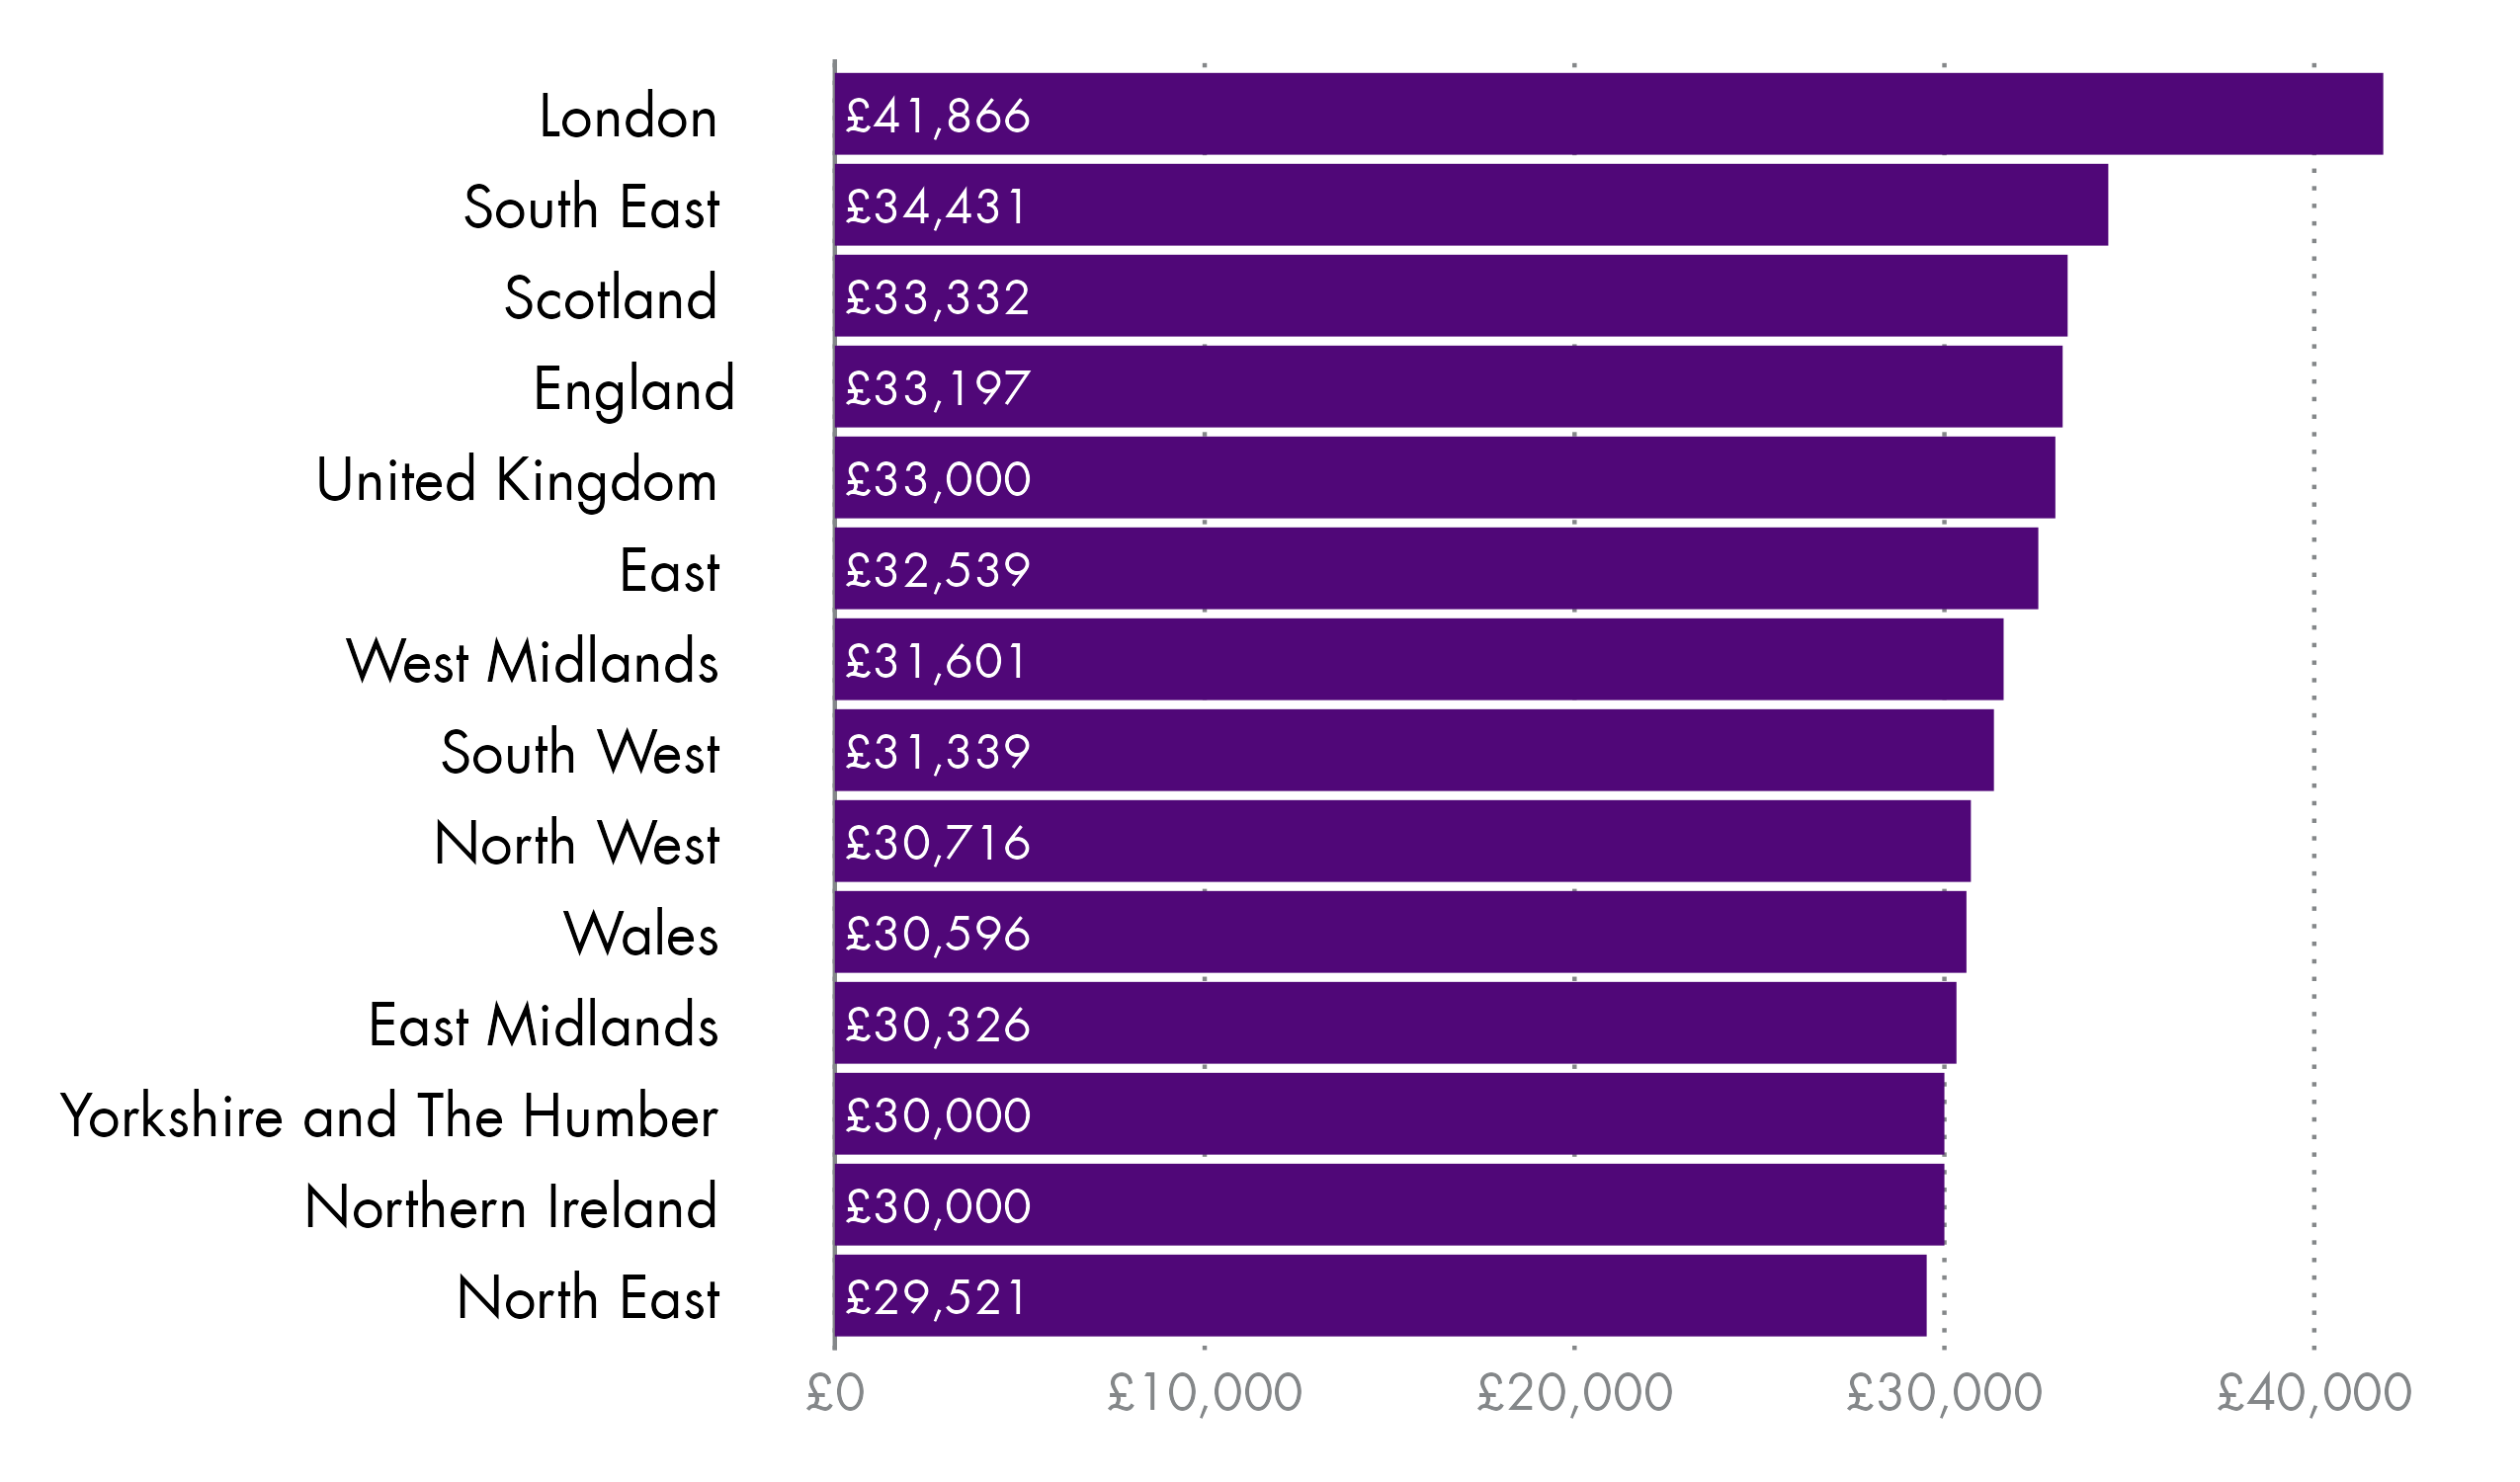 A horizontal bar chart showing the median gross annual pay by nations and regions of the UK ranked from highest to lowest.